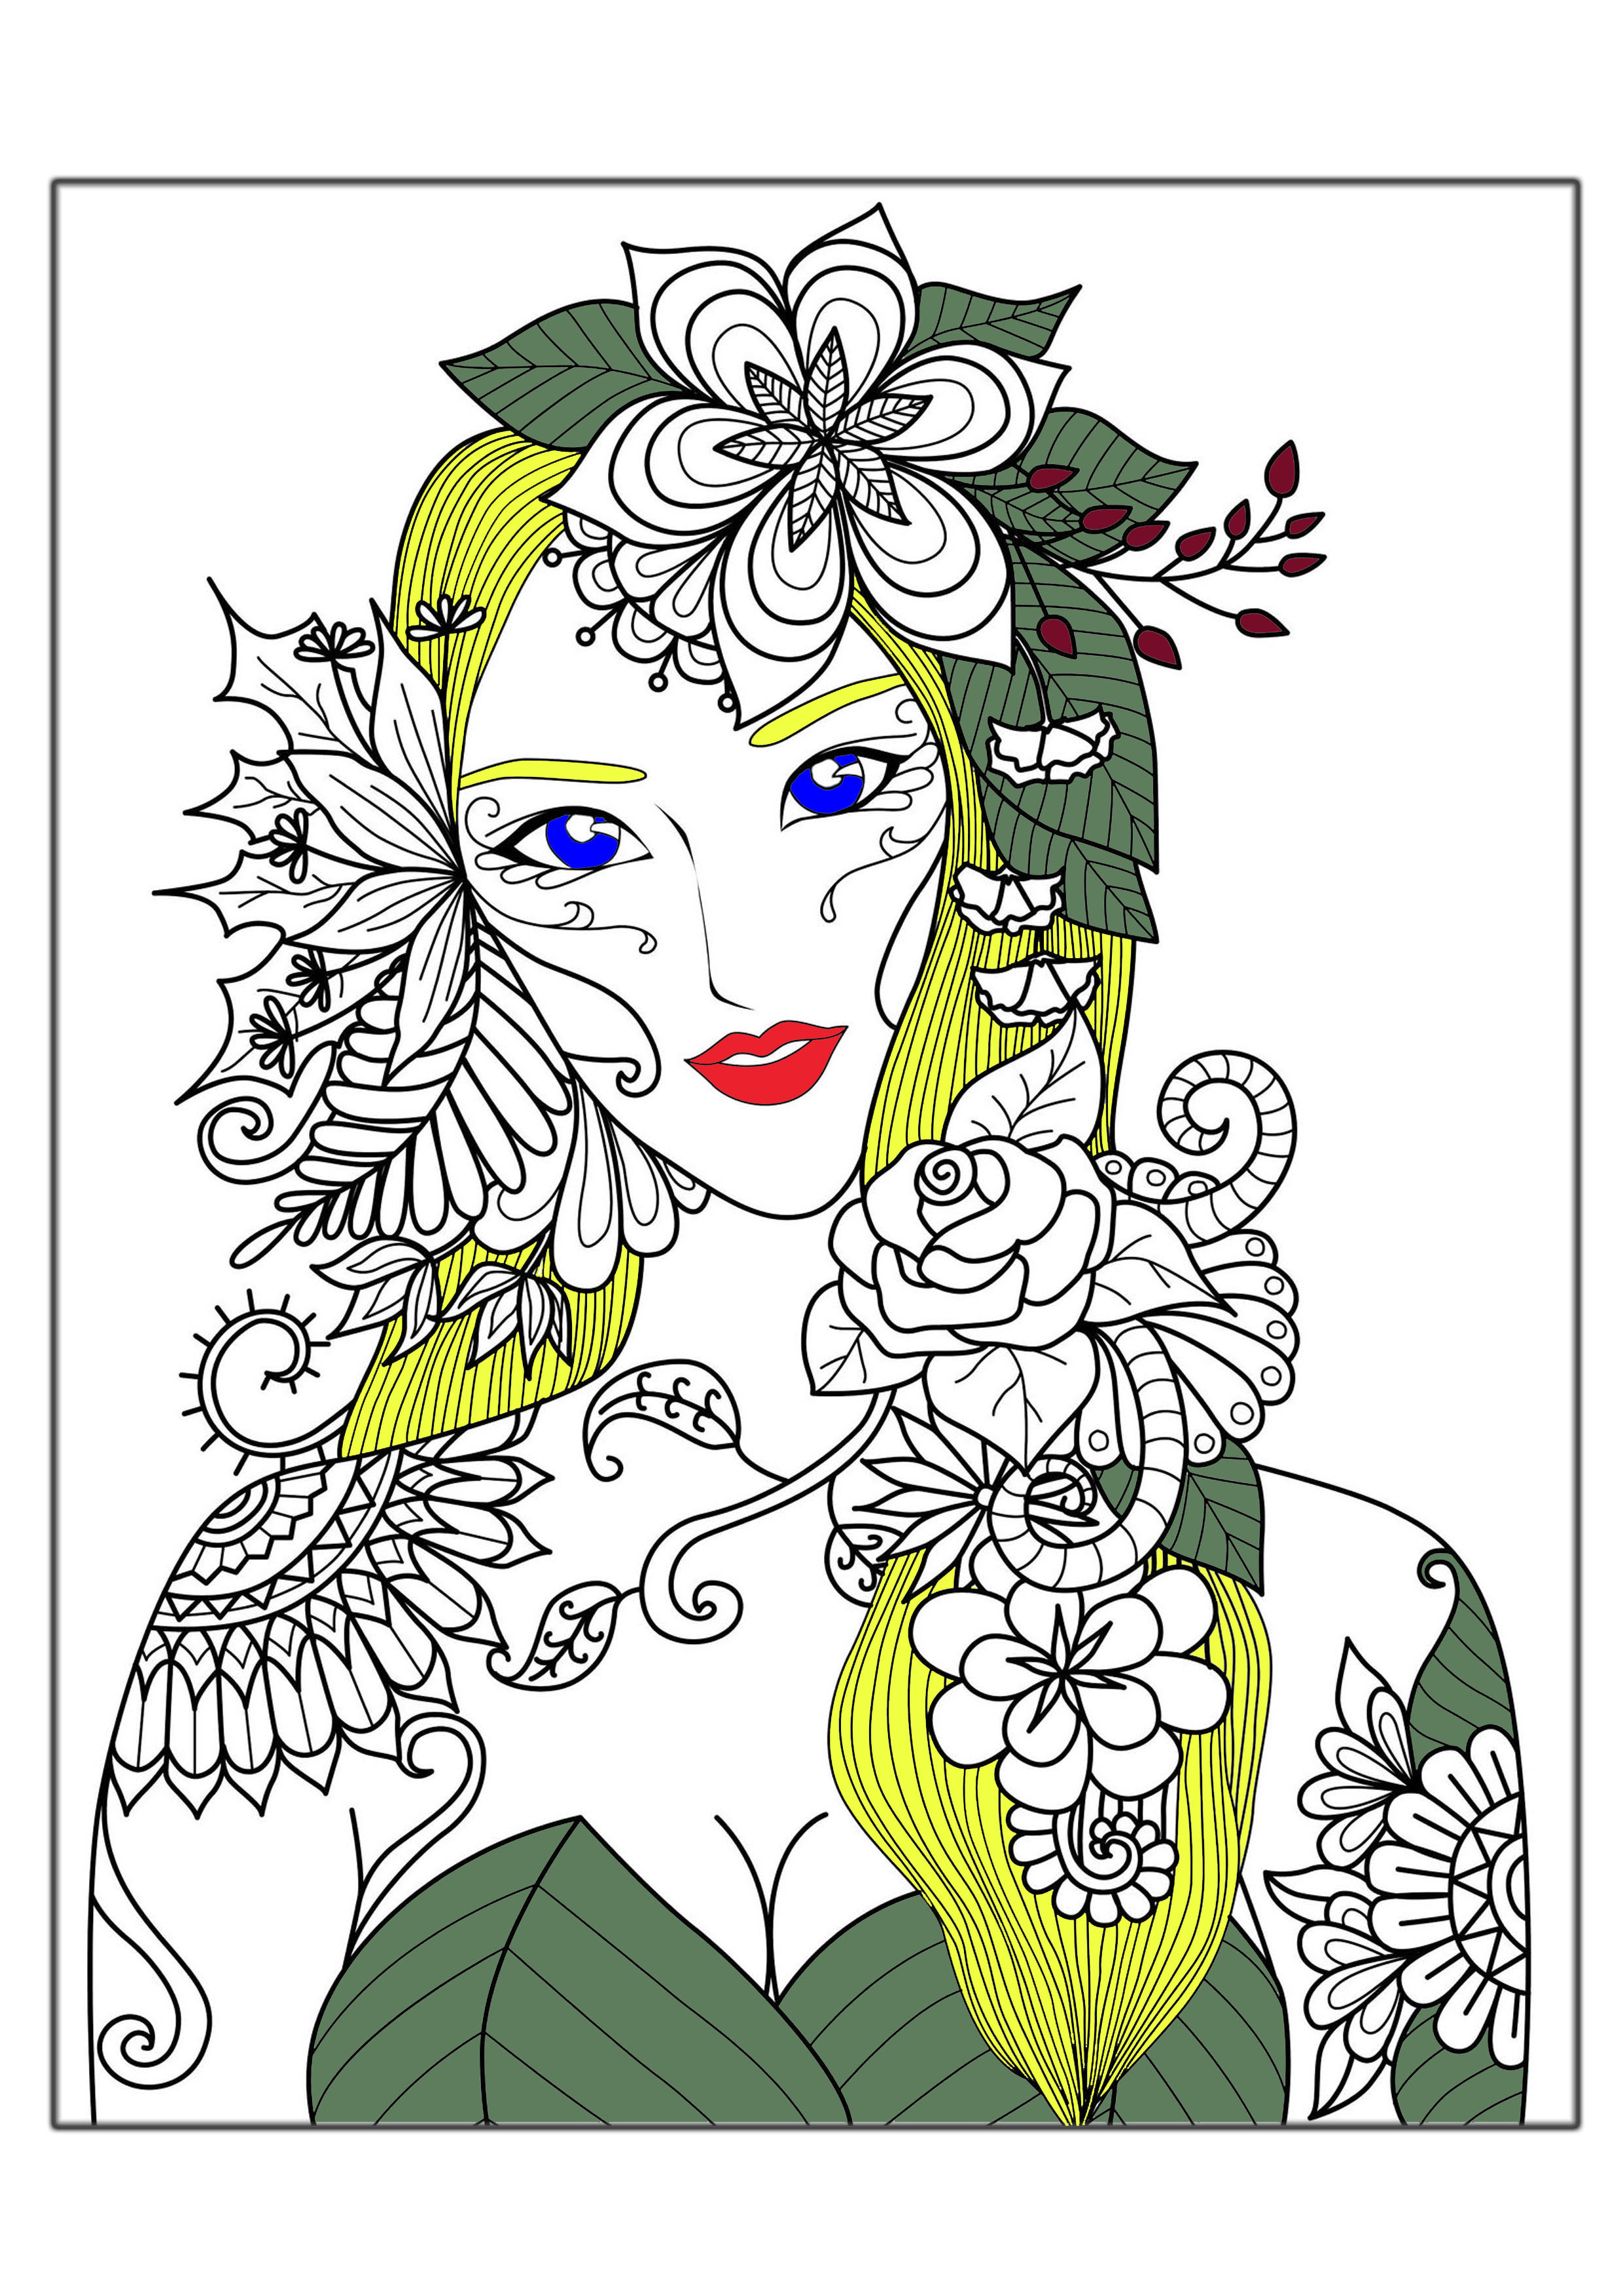 Zen and Anti stress - Coloring pages for adults | JustColor